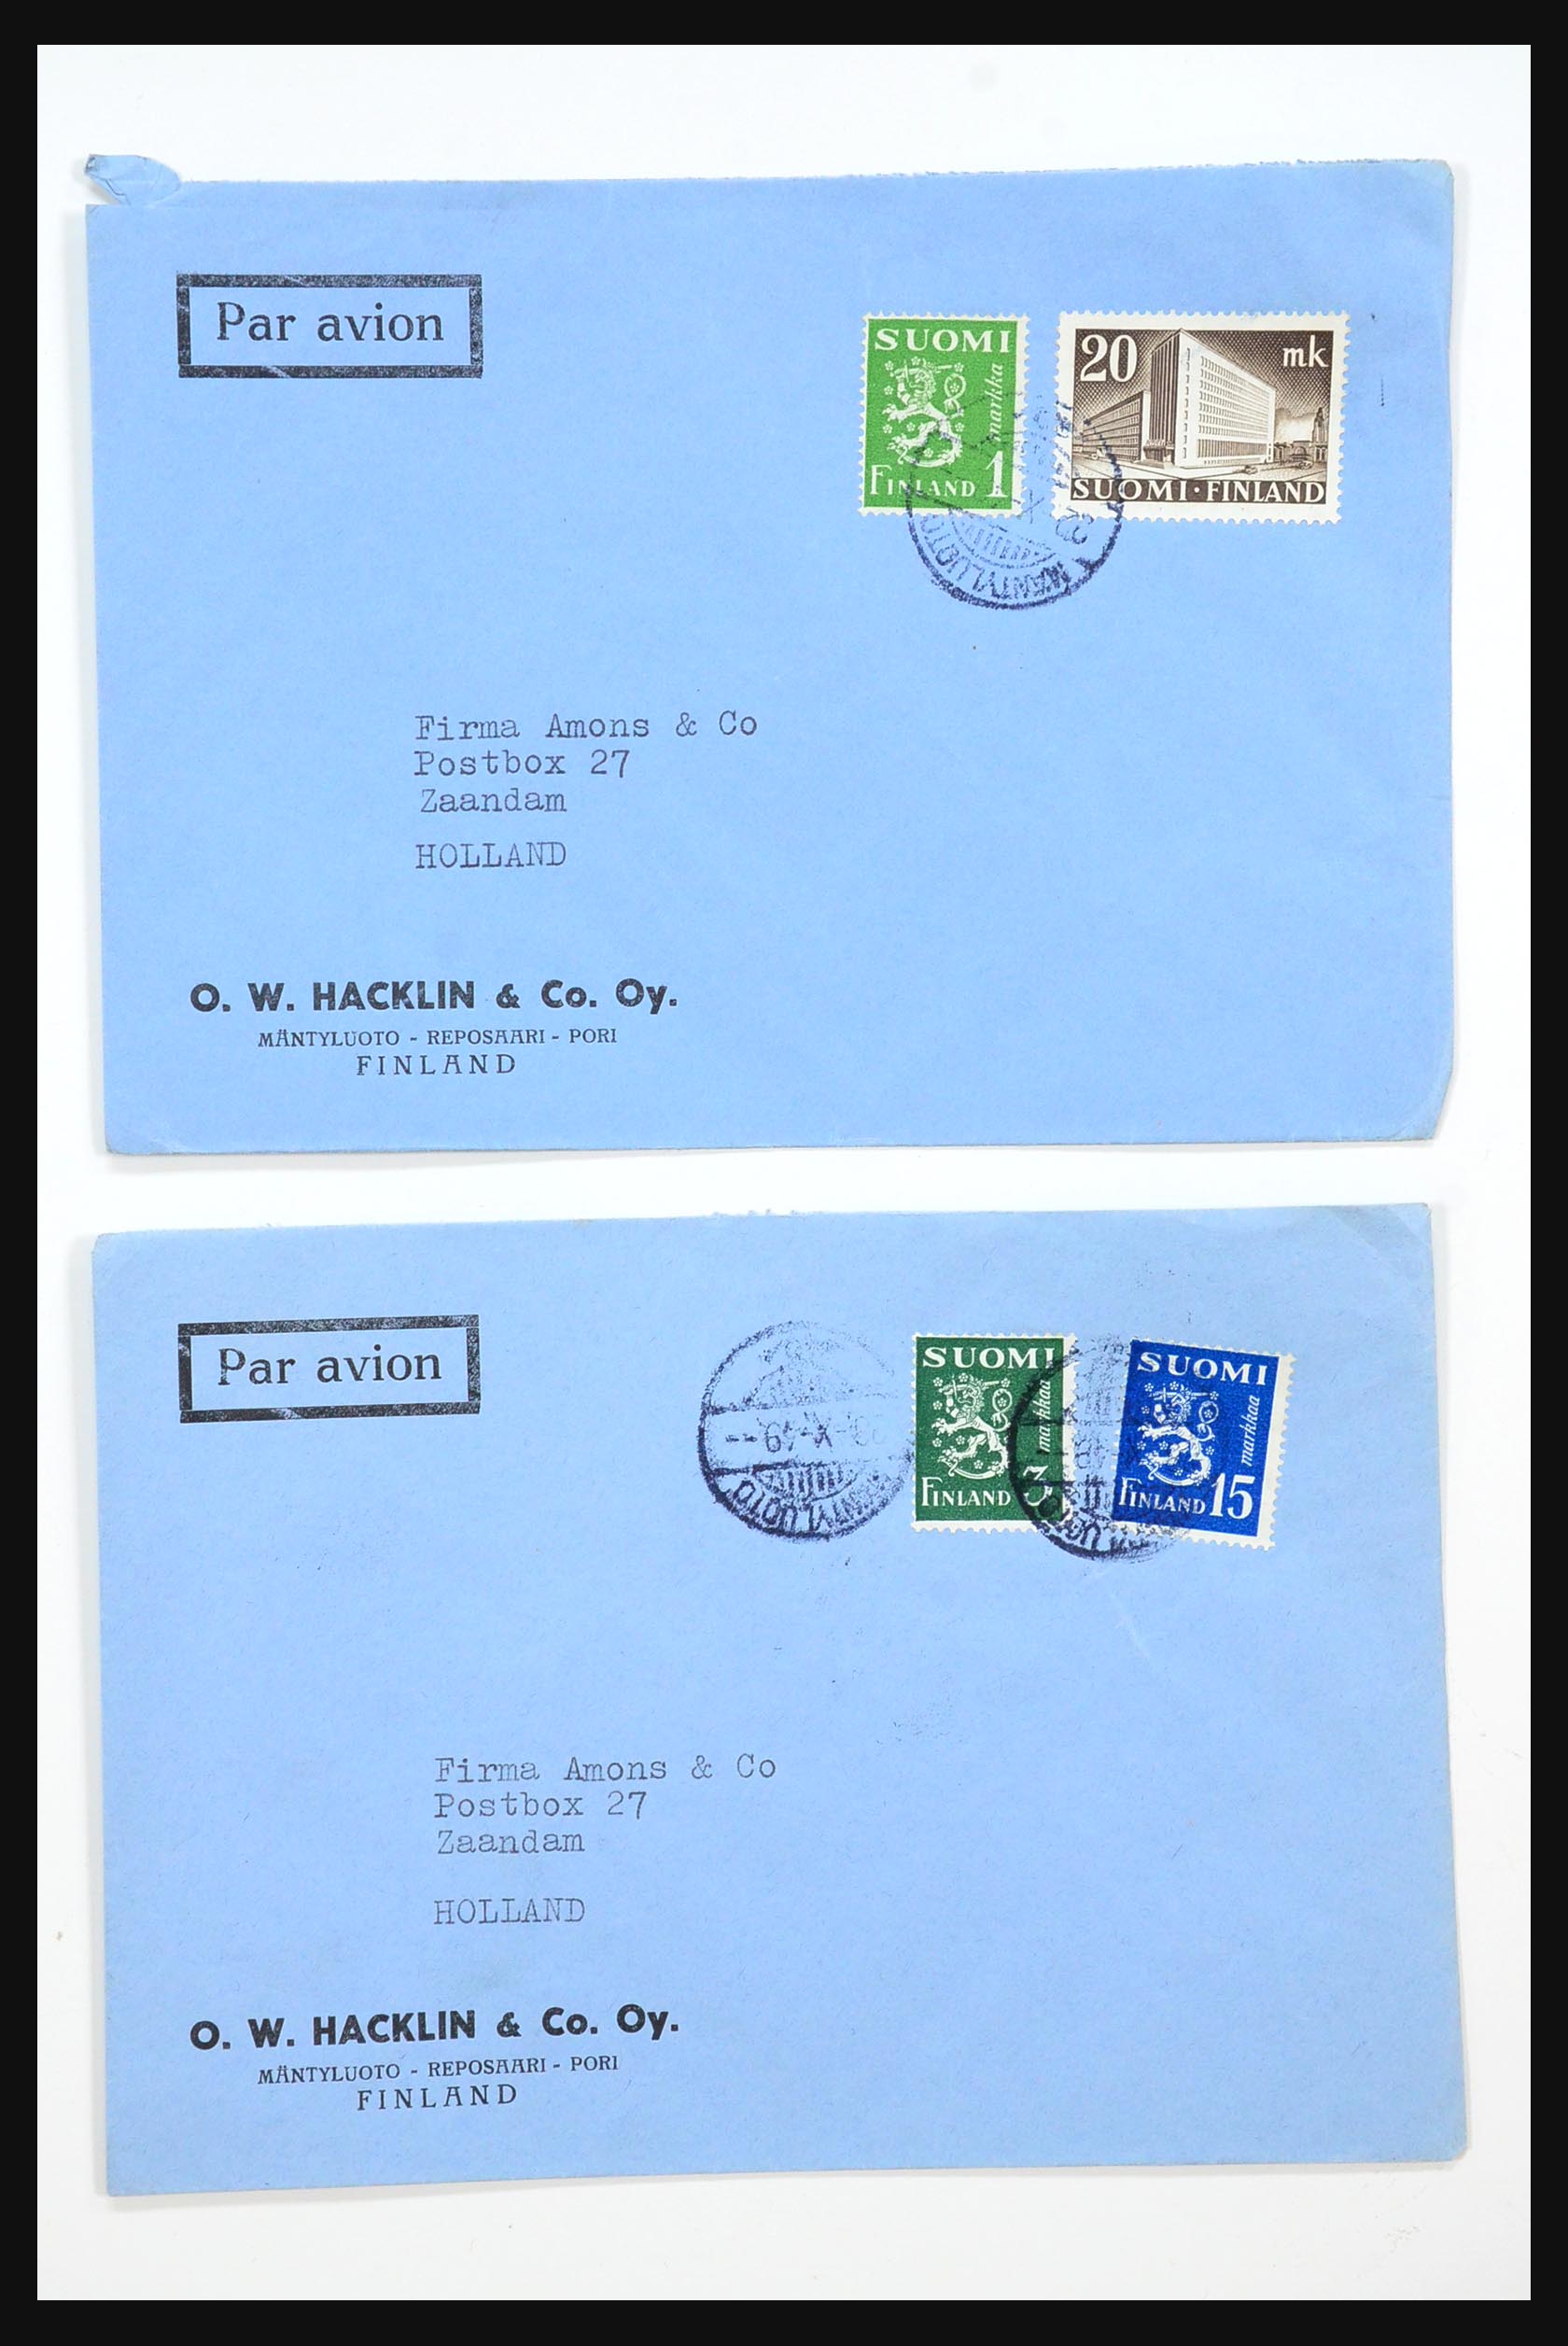 31363 050 - 31363 Finland covers 1874-1974.